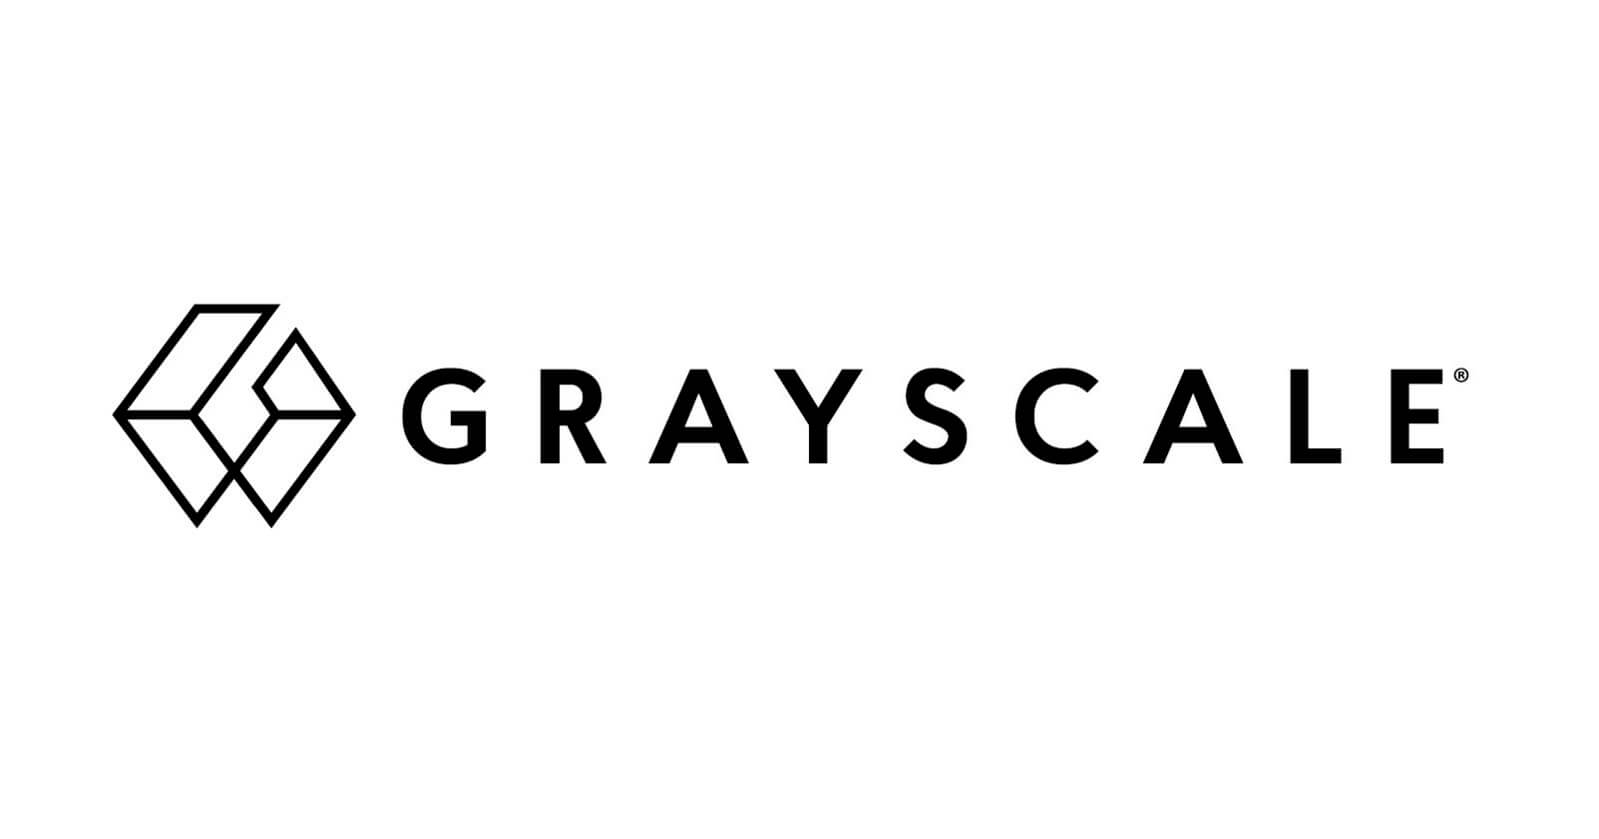 Grayscale Launched a Decentralized AI Fund